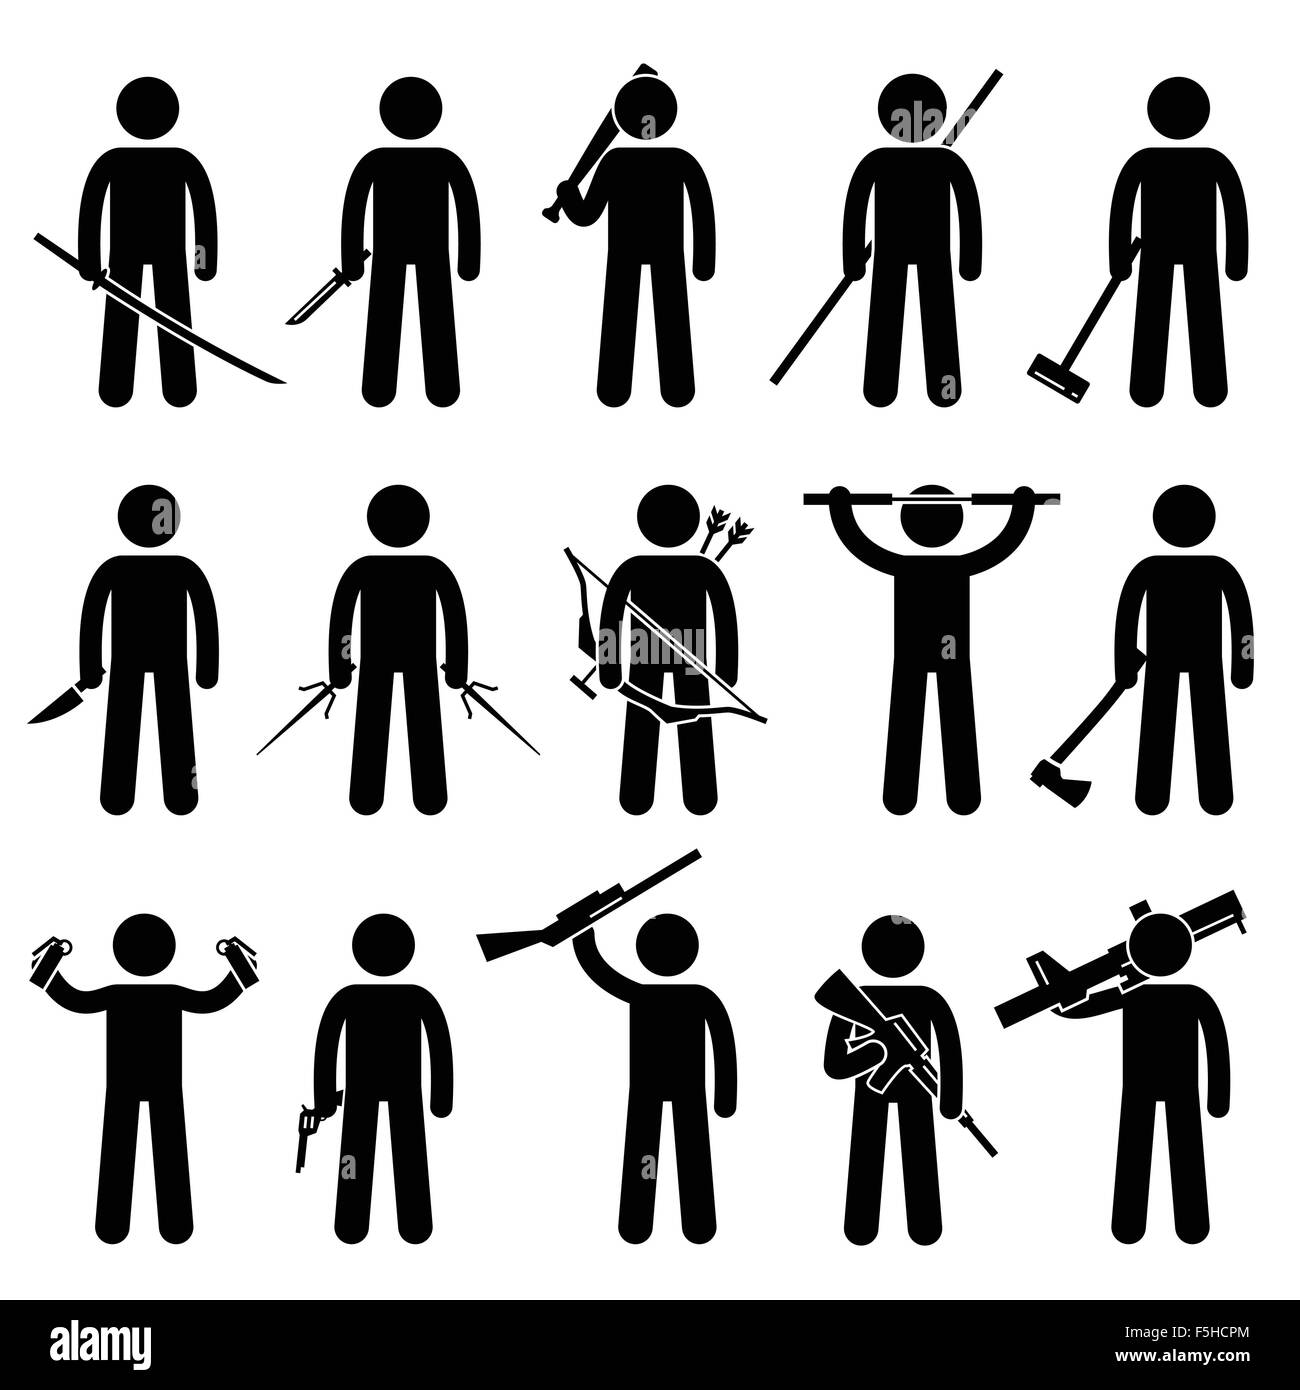 Man Holding and Using Weapons Stick Figure Pictogram Icons Stock Vector